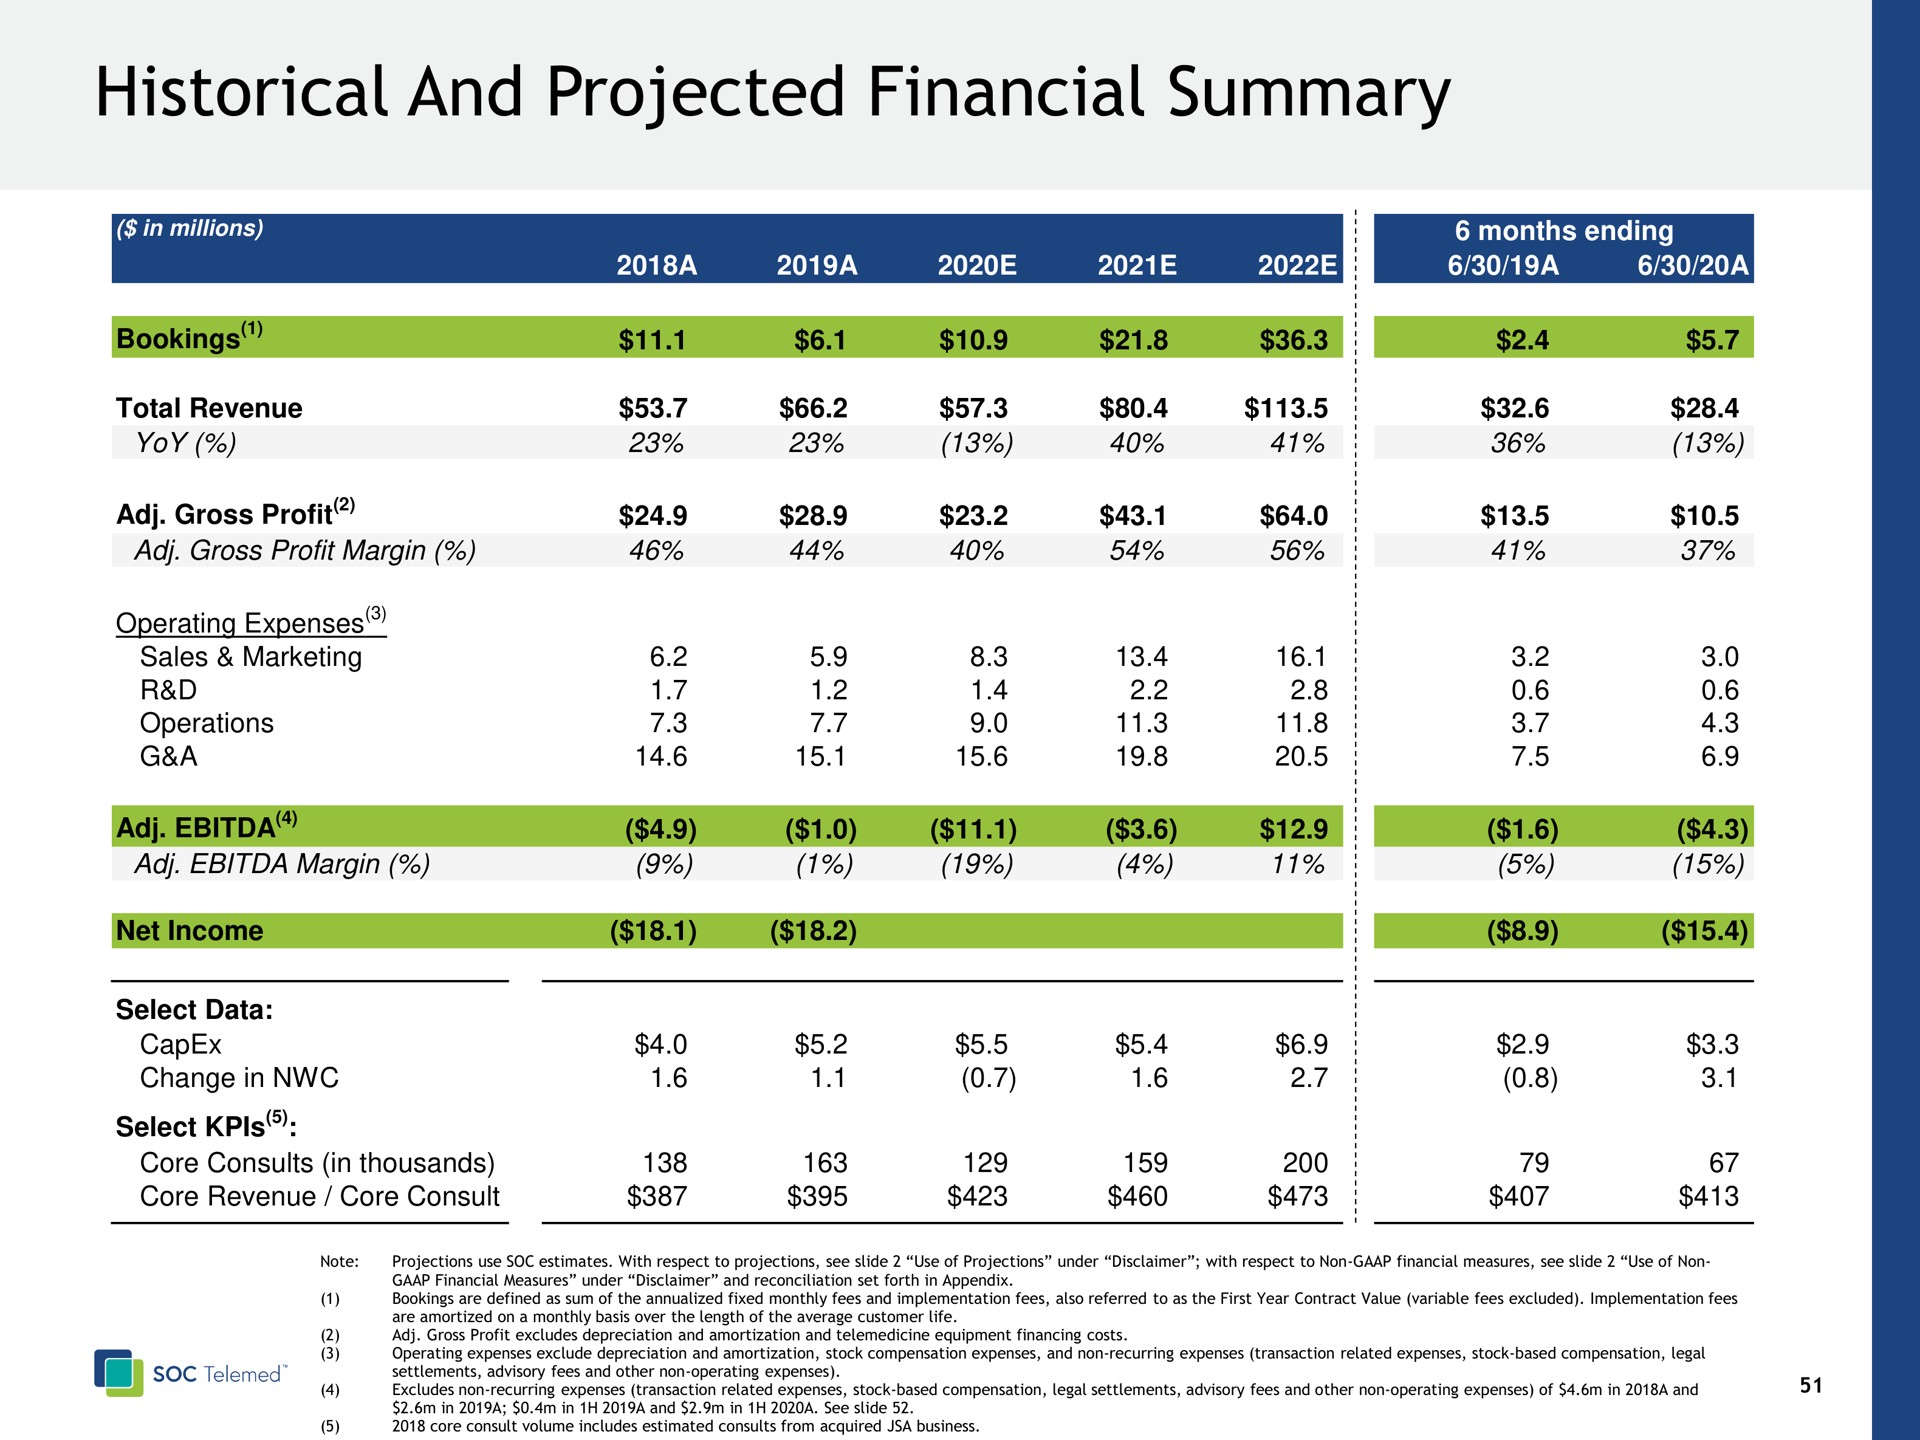 historical and projected financial summary | SOC Telemed